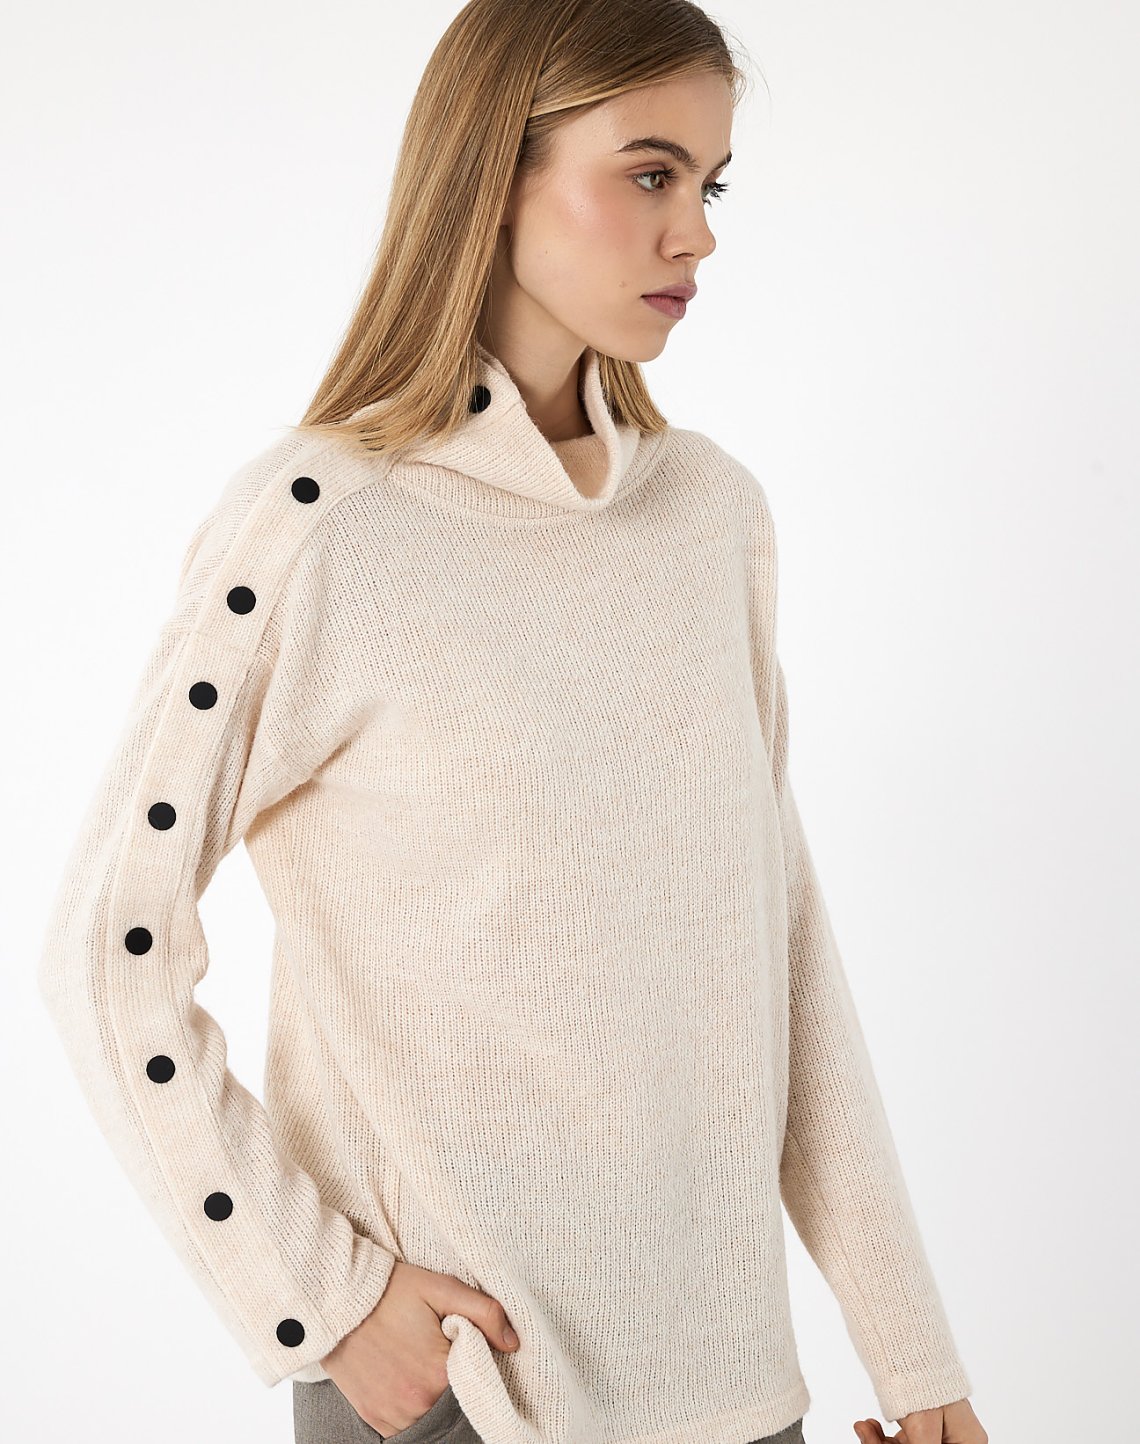 Knit blouse with buttons